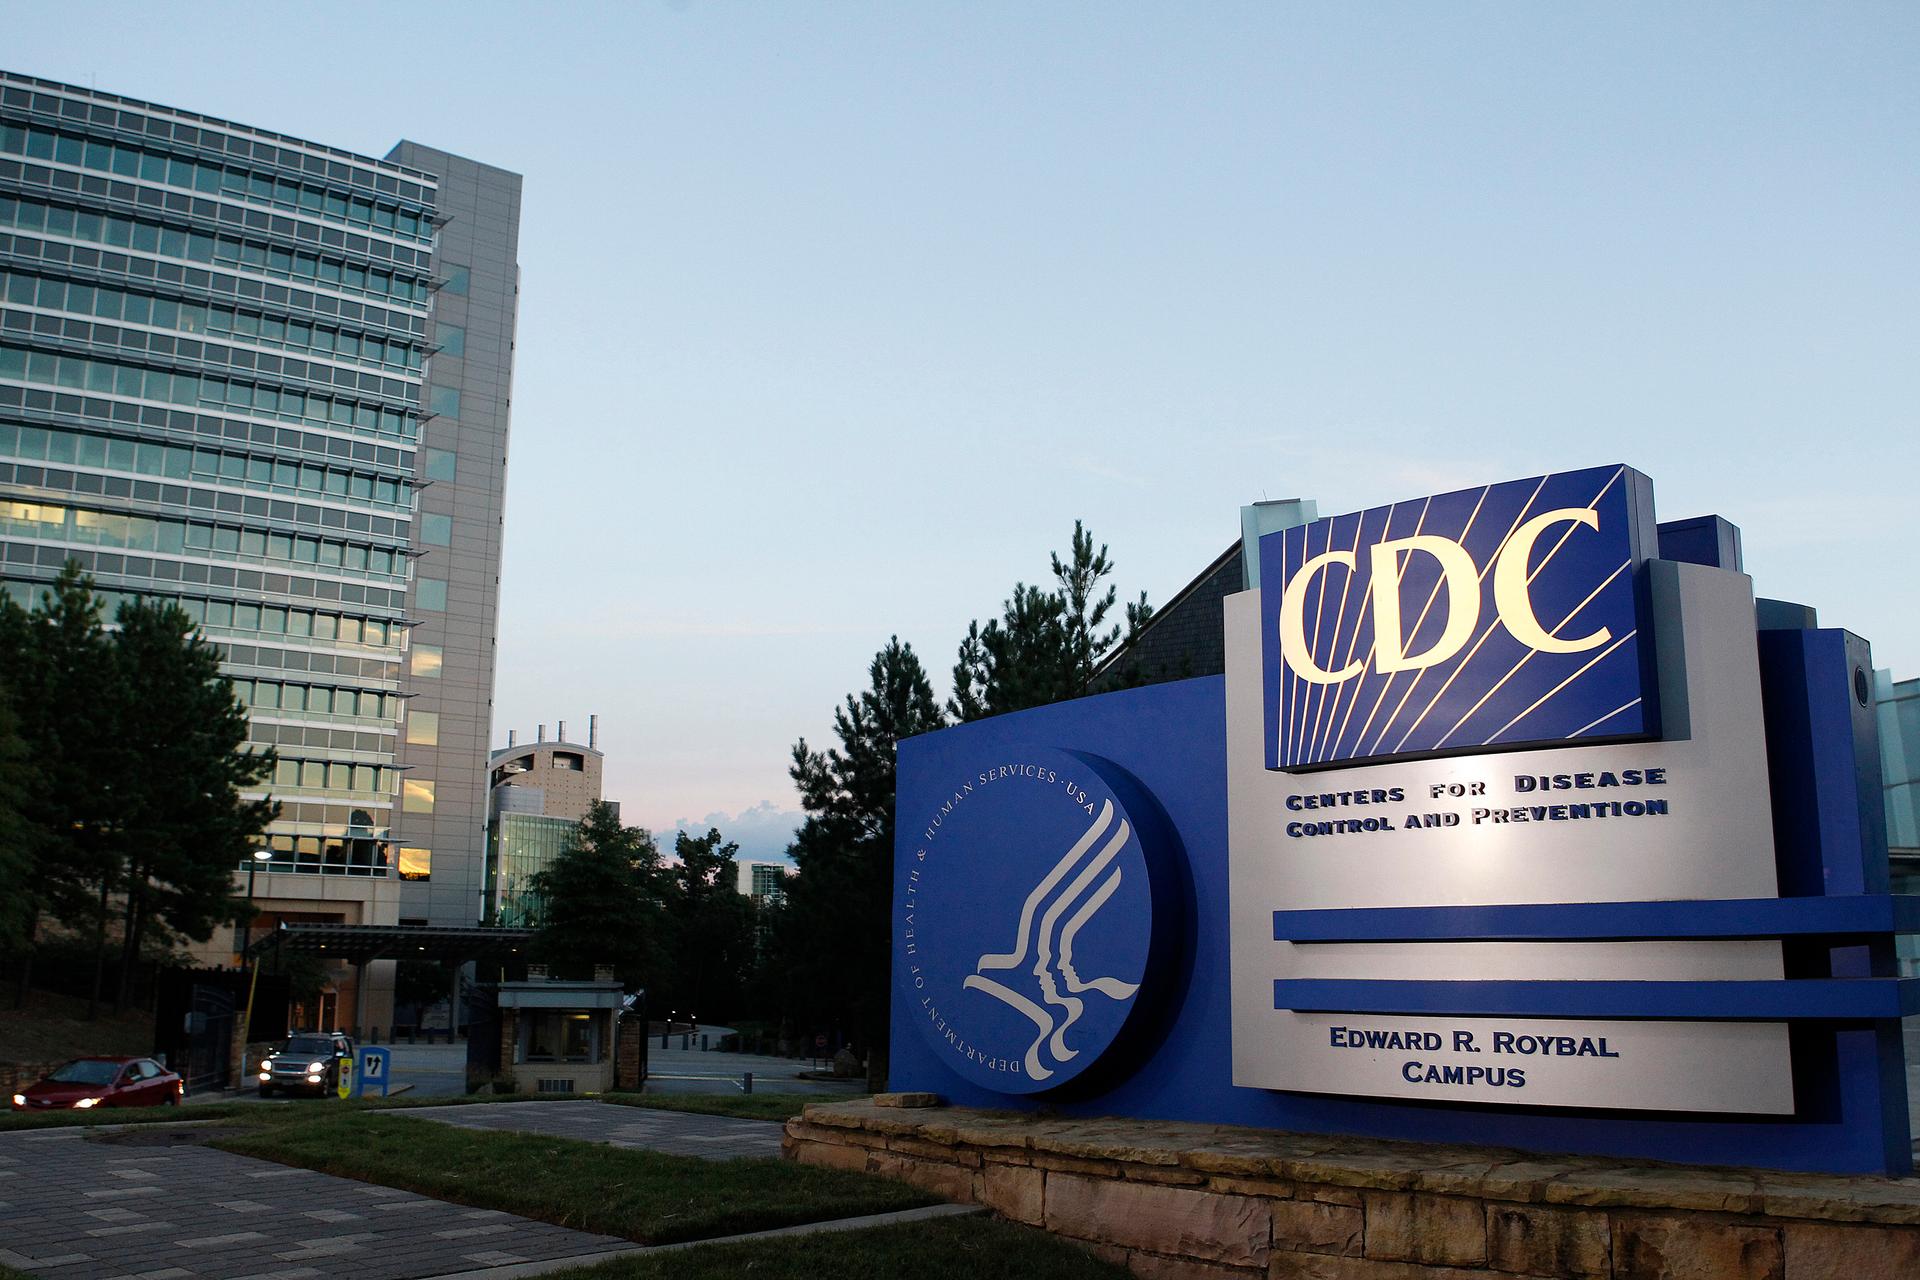 The work at the Centers for Disease Control and Prevention (CDC) headquarters in Atlanta is increasingly international in scope.